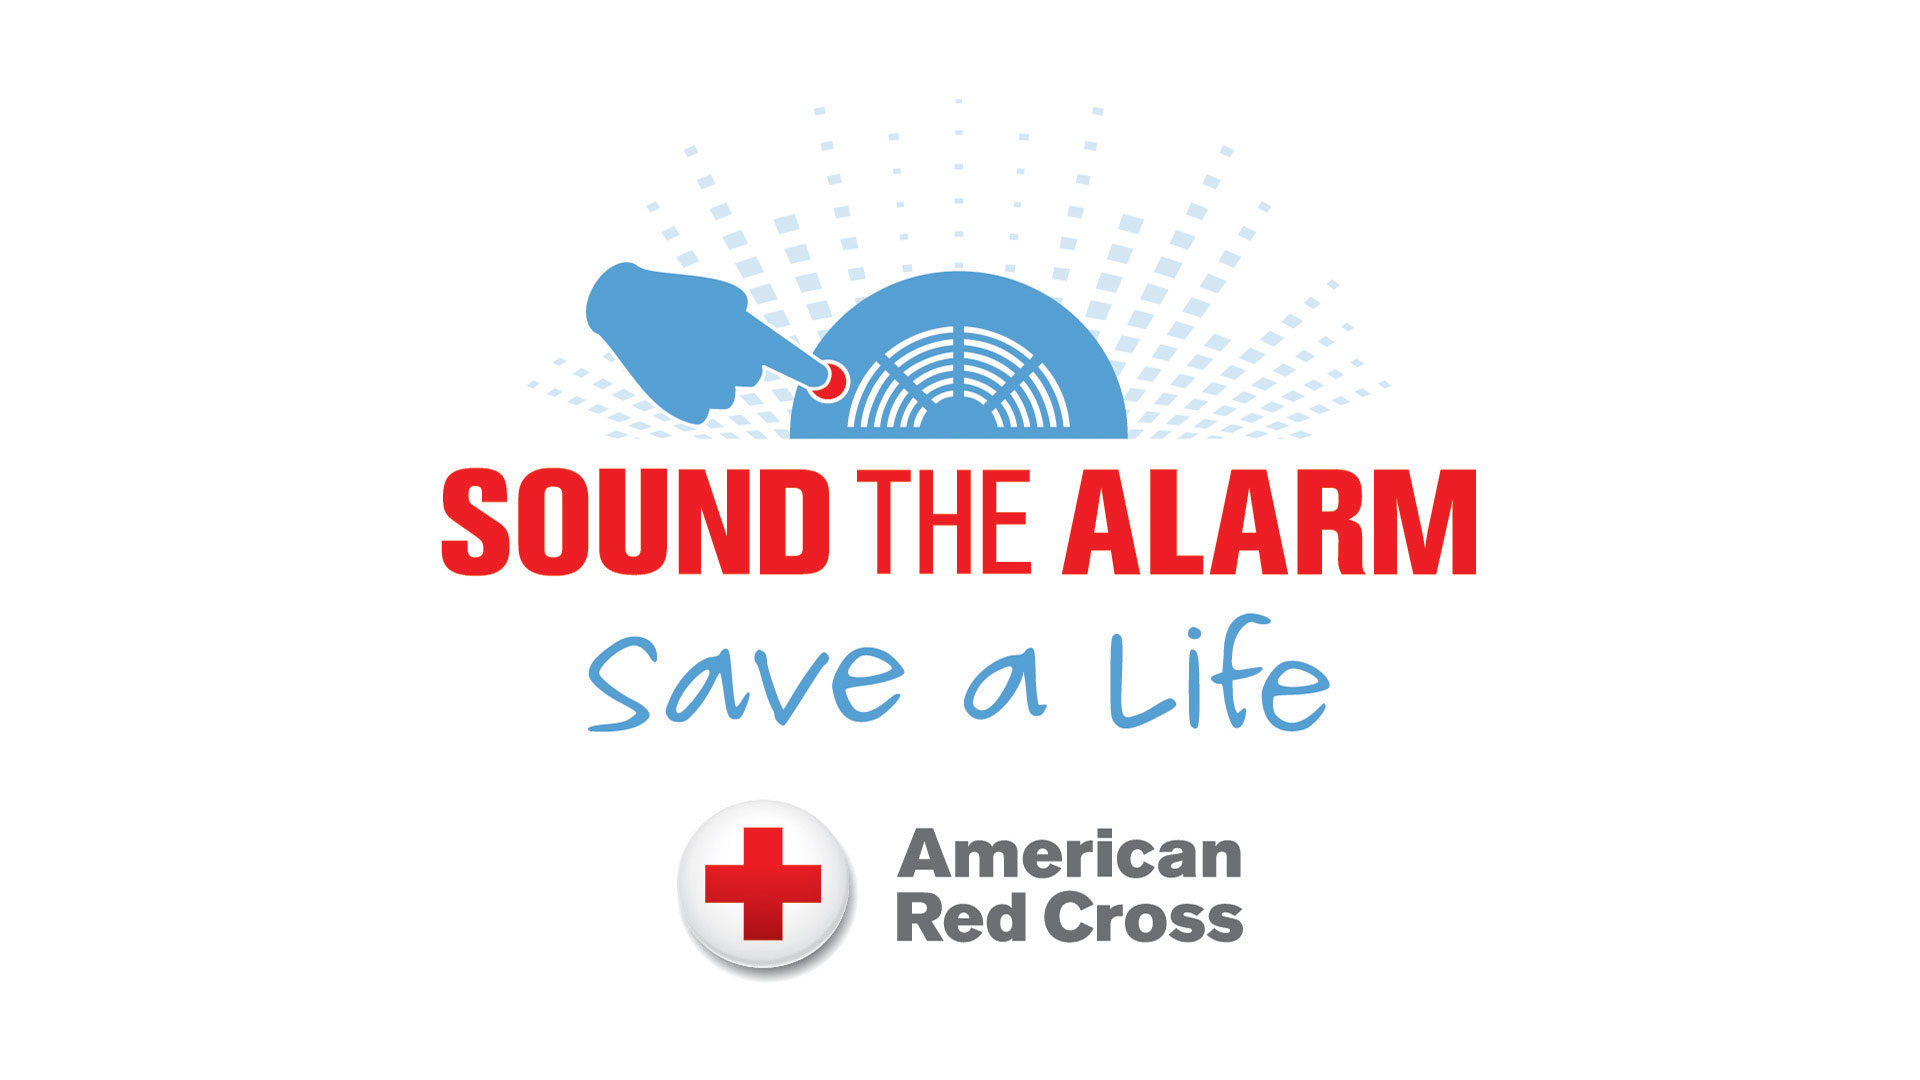 Sound the alarm save a life banner with Red Cross logo